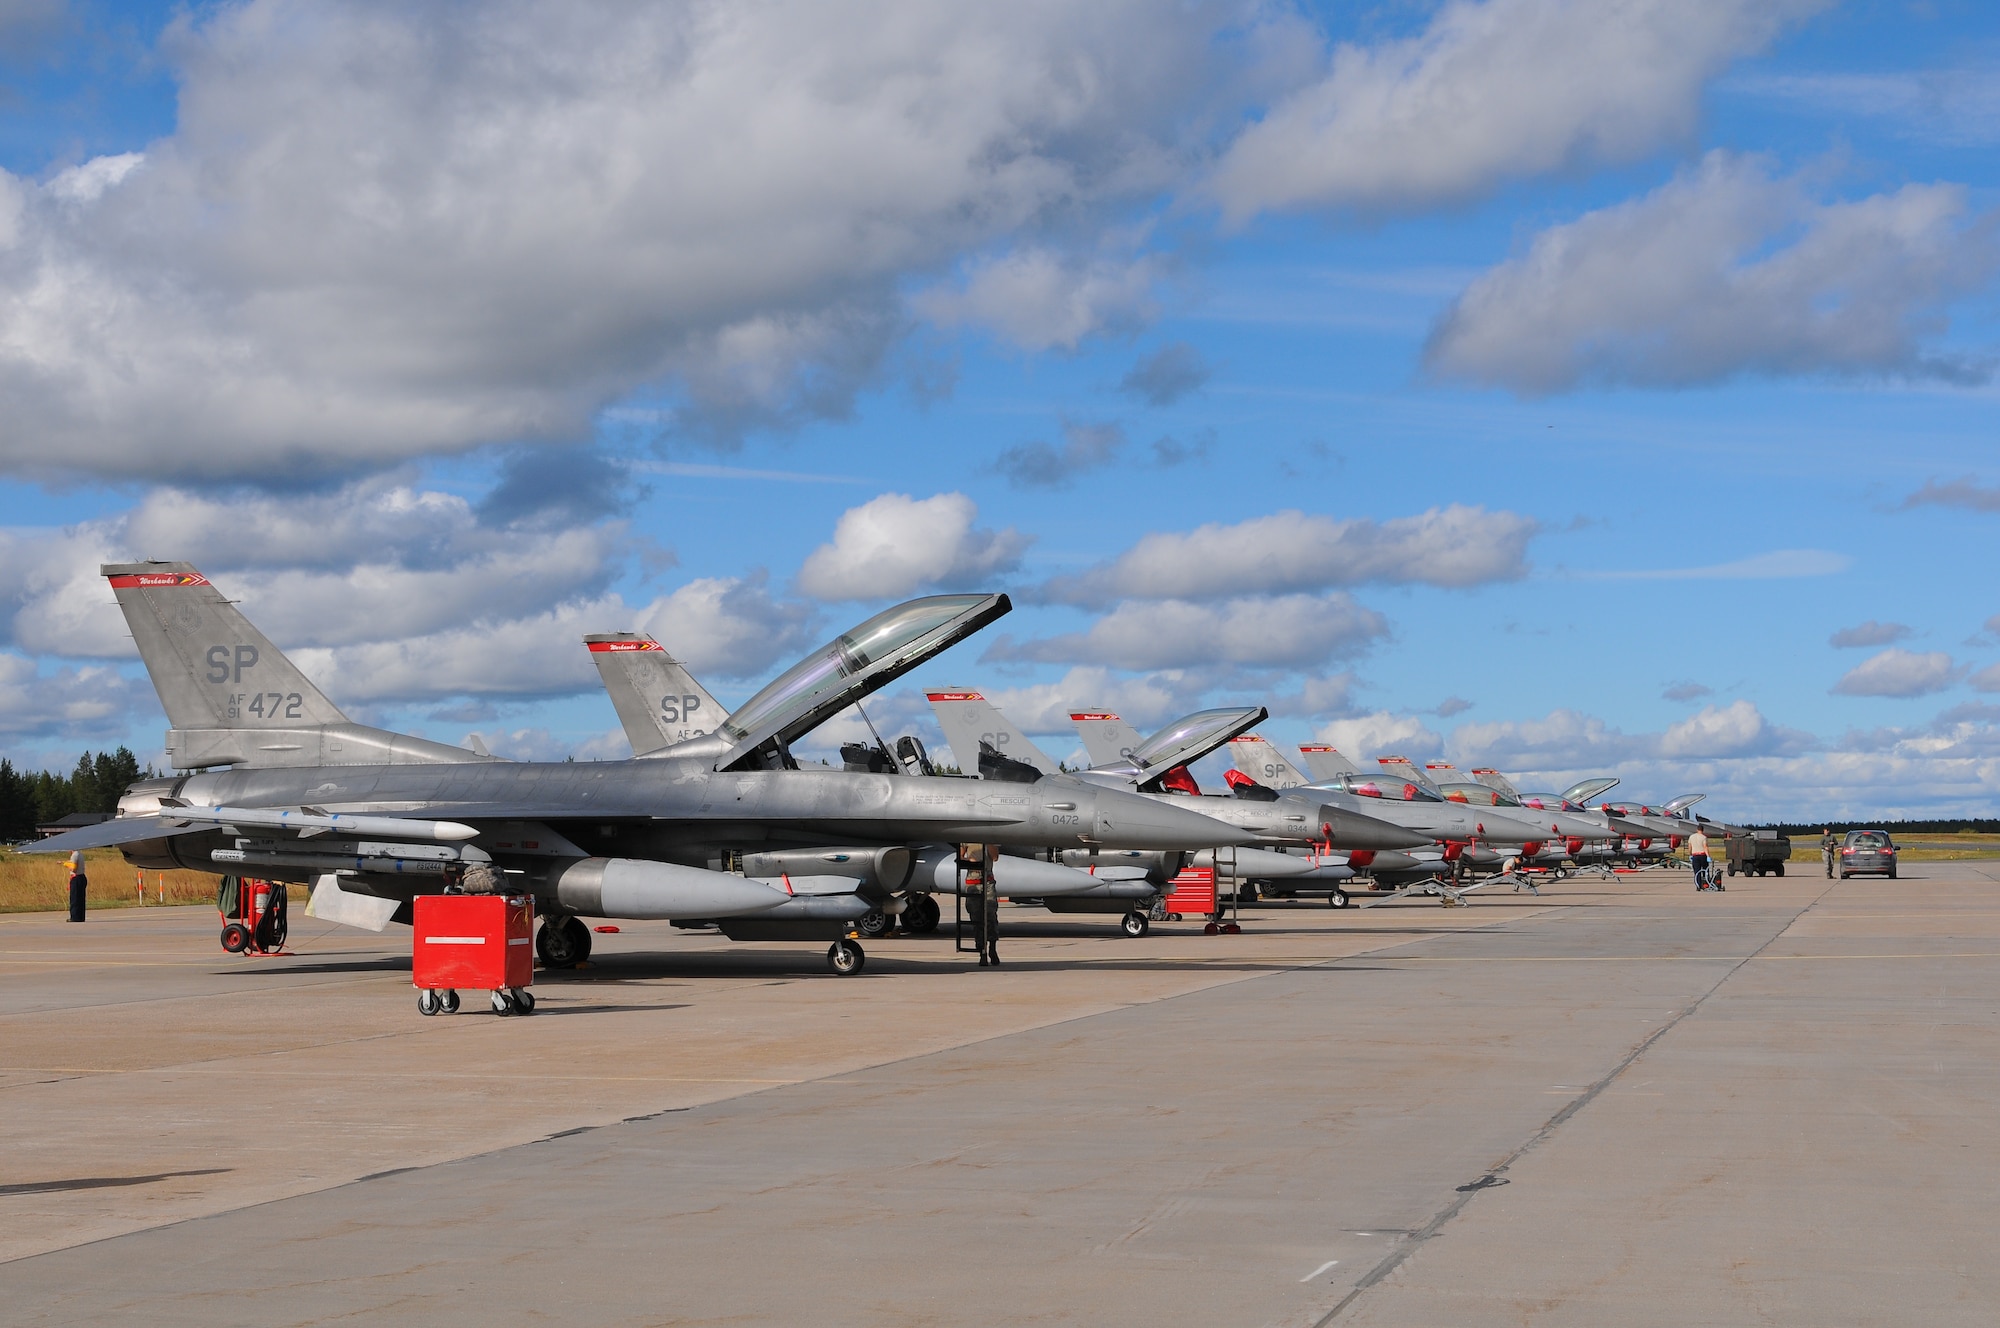 KALLAX AIR BASE, Sweden -- F-16 Fighting Falcon aircraft from the 480th Fighter Squadron sit in a row on the ramp here Sept. 3. The 480th FS from Spangdahlem Air Base is here in  support of the Nordic Air Meet 2012. The multinational training exercise brought together more than 50 aircraft from the United States, United Kingdom, Denmark, Finland, Switzerland and Sweden to participate in tactical role-playing training missions. The three week exercise enabled the different nations to exchange aerial tactics and capabilities to improve combat power effectiveness in solo and joint environments while building and strengthening international partnerships. (U.S. Air Force Photo by Airman 1st Class Dillon Davis/Released)